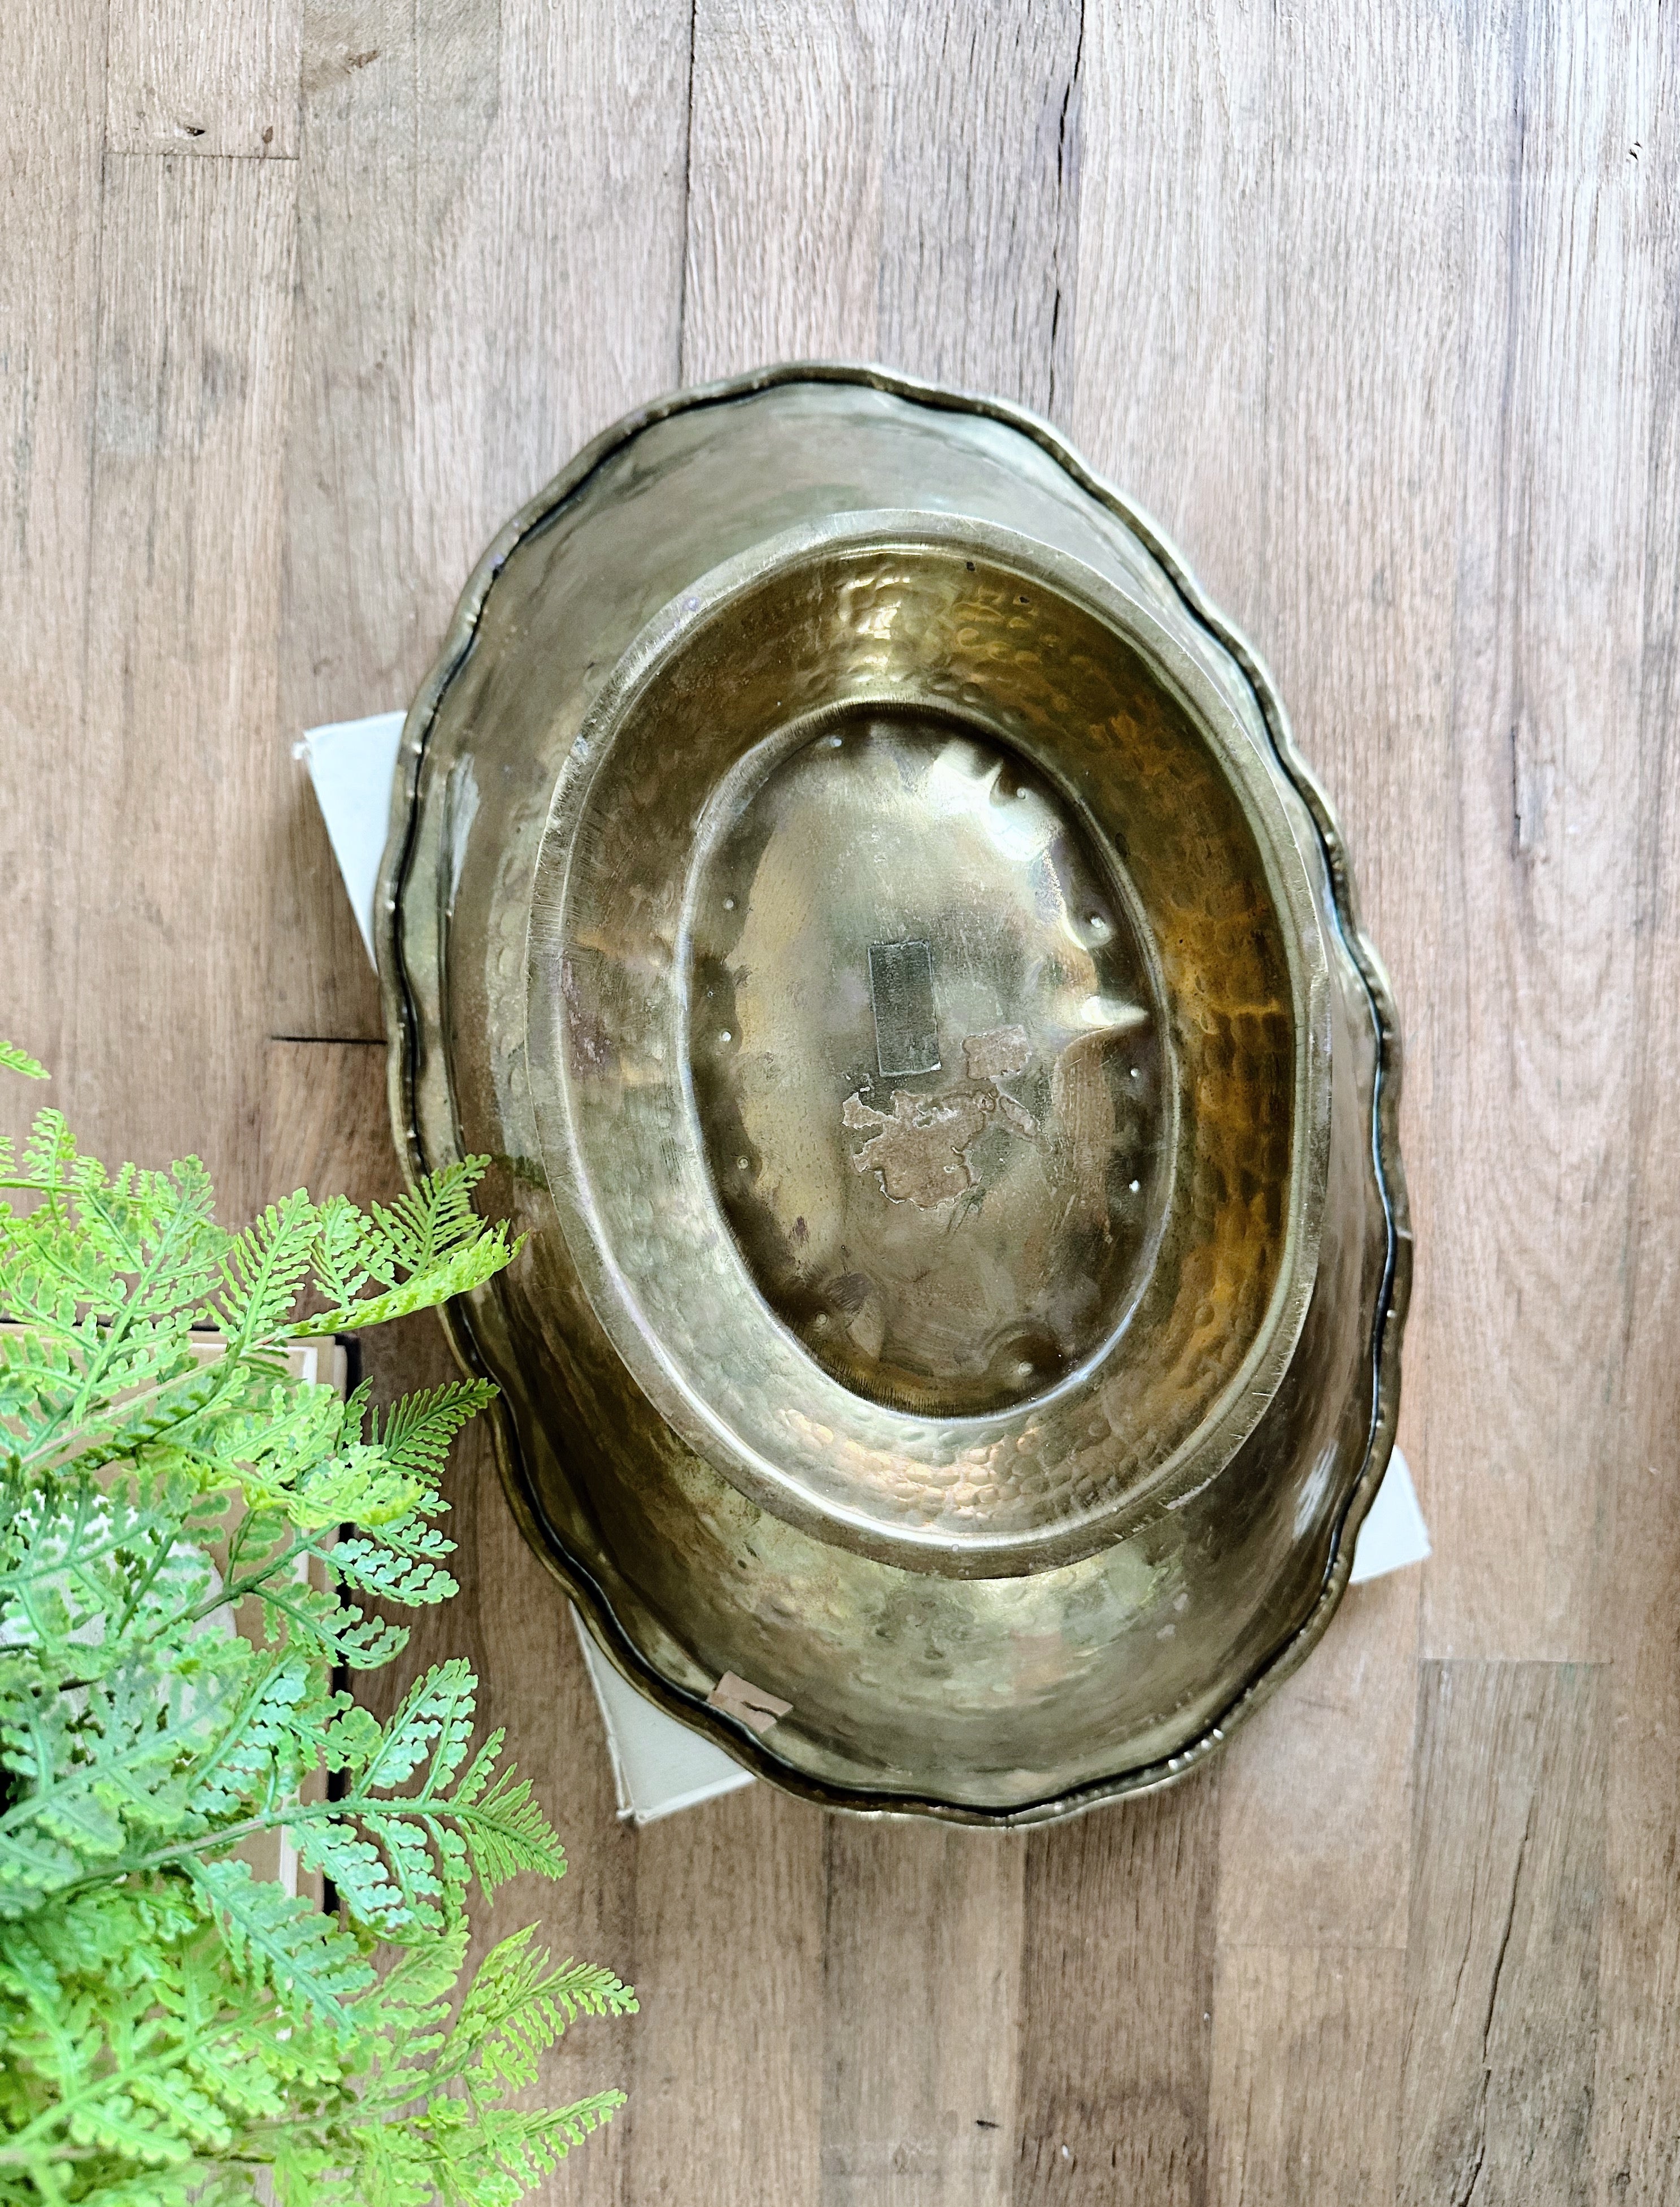 Beautiful Vintage Hammered Brass Compote